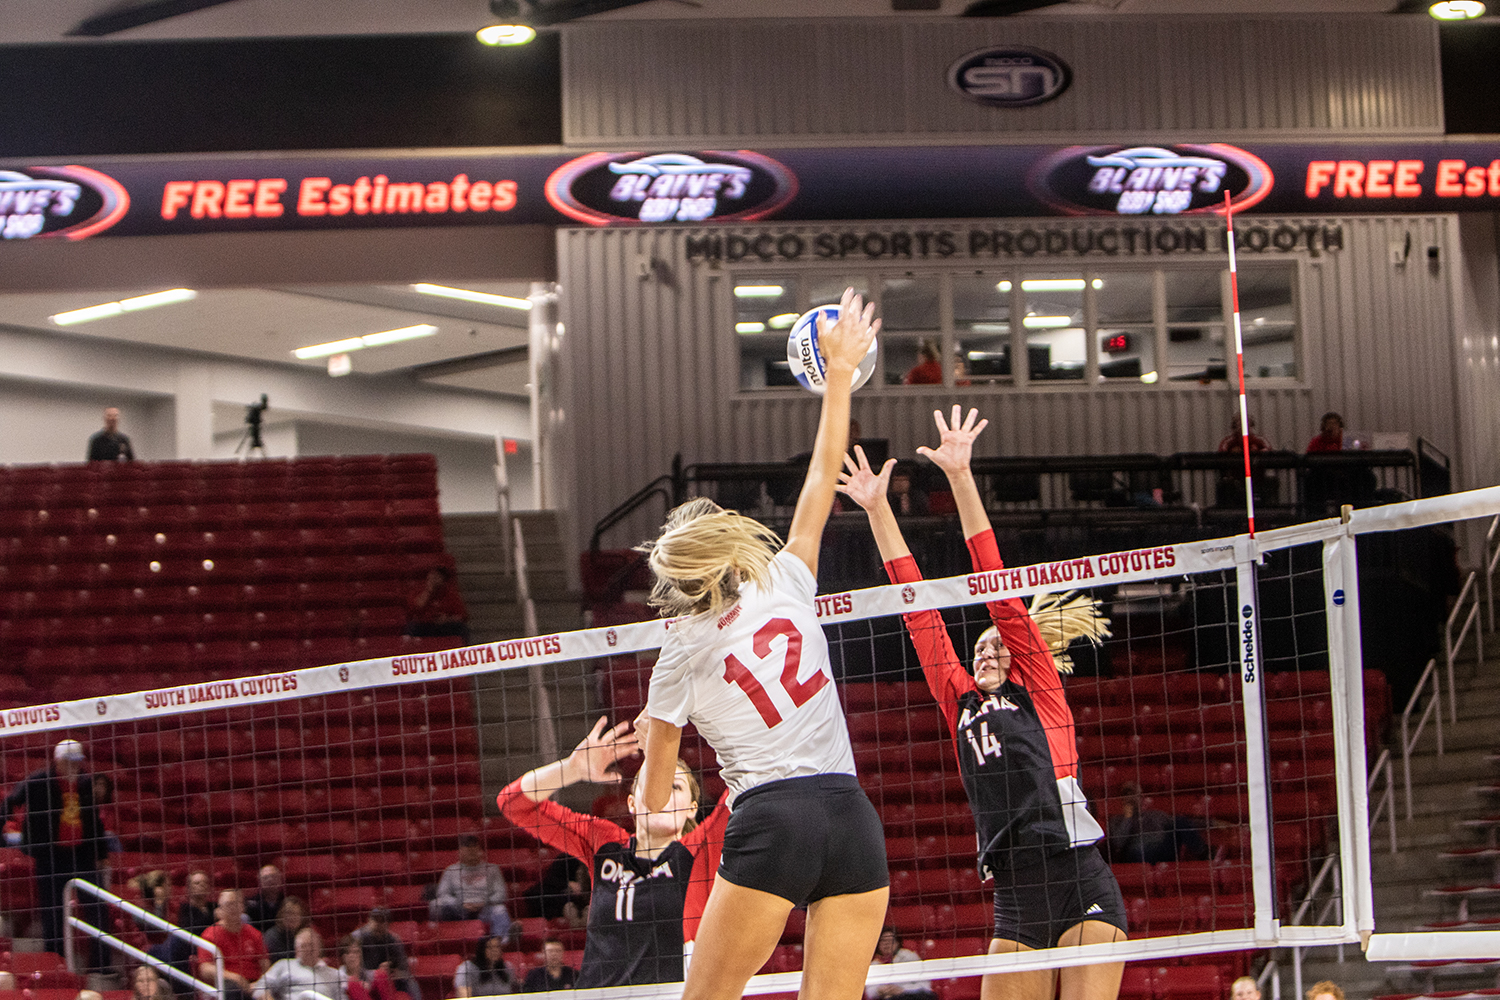 Coyotes prevail in tandem five-set matches